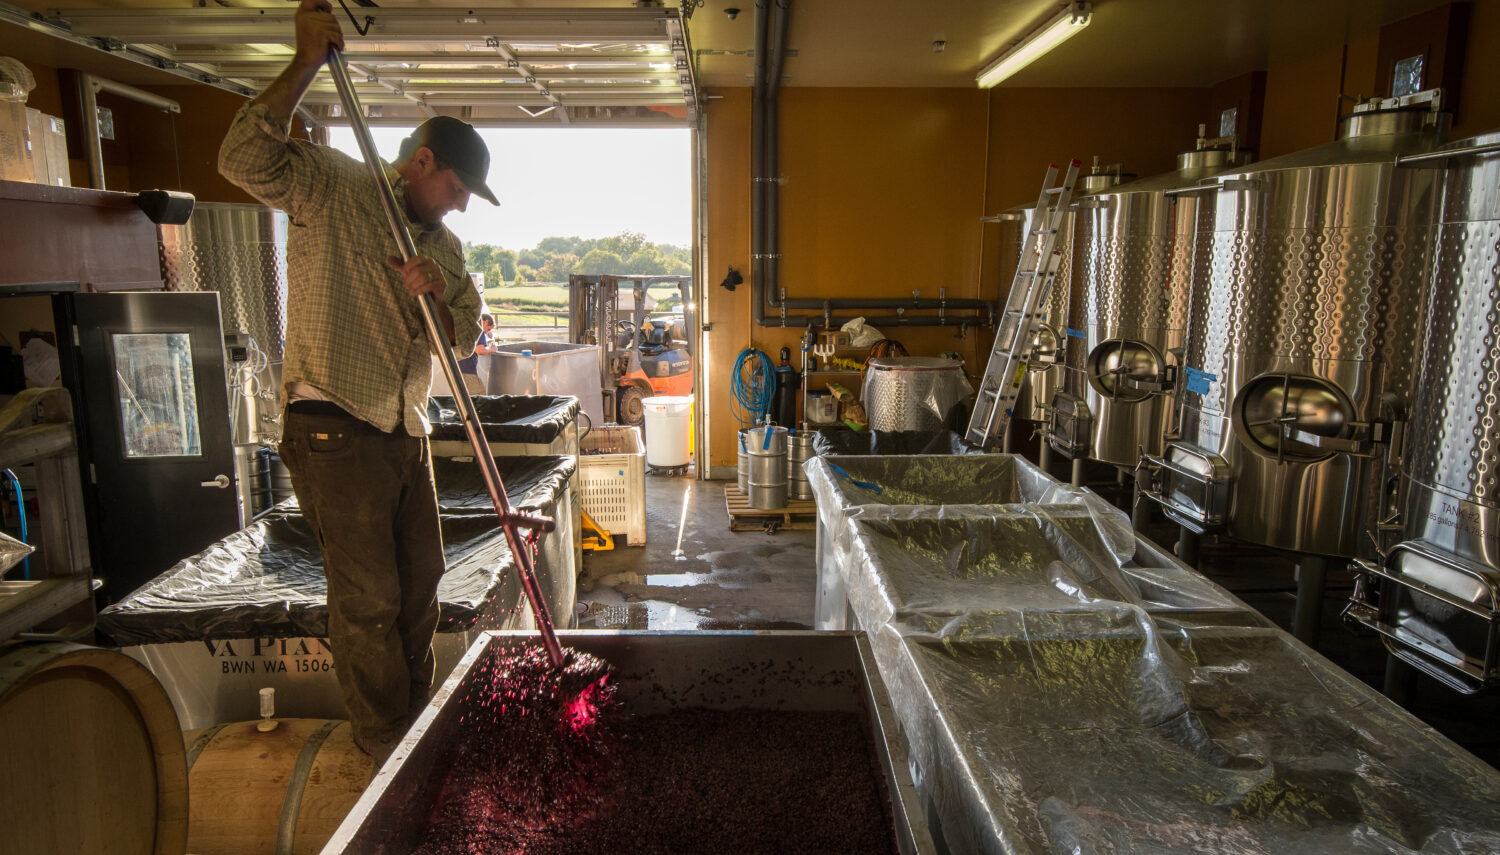 a man in a baseball cap pushes a long-handled tool into a tank full of red grapes in a winery.